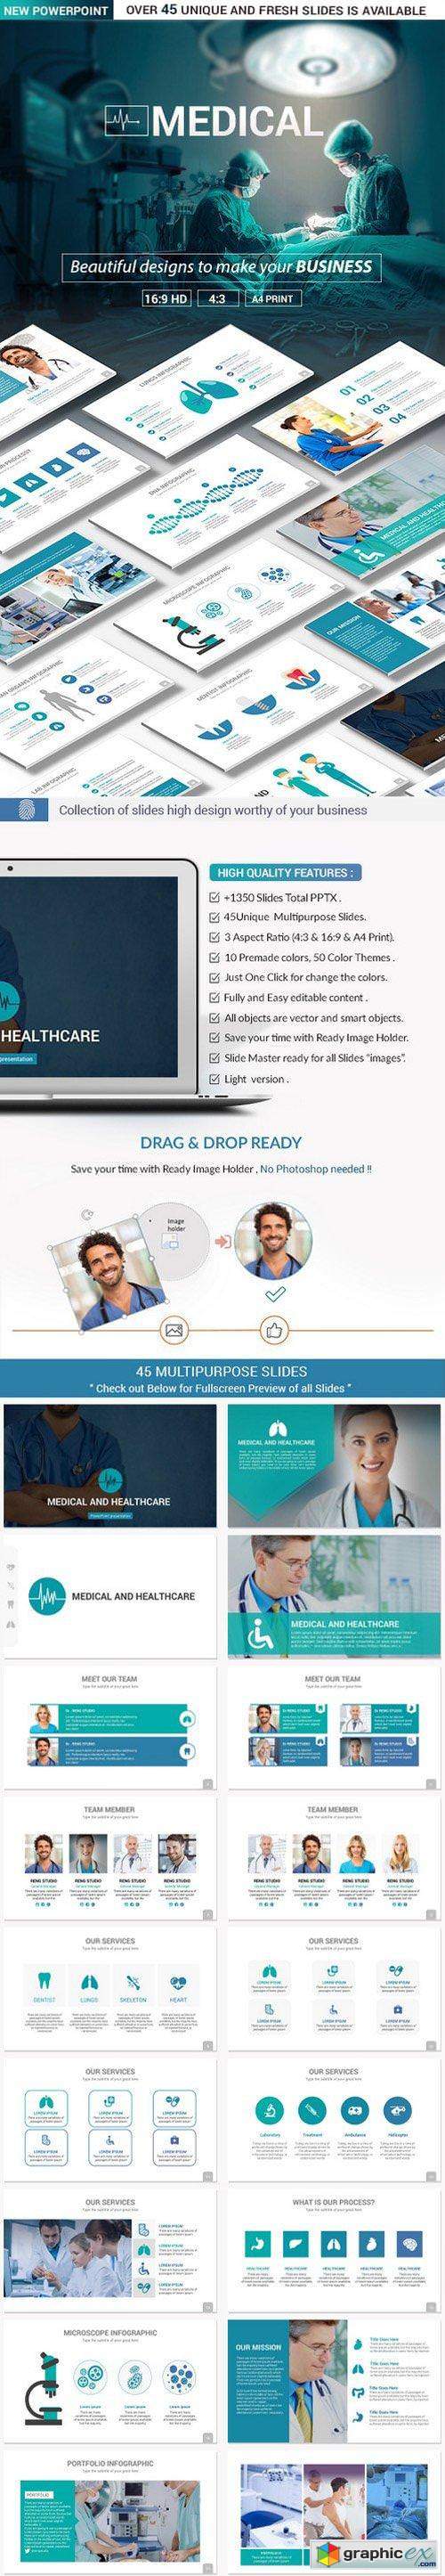 Medical Powerpoint Presentation Template